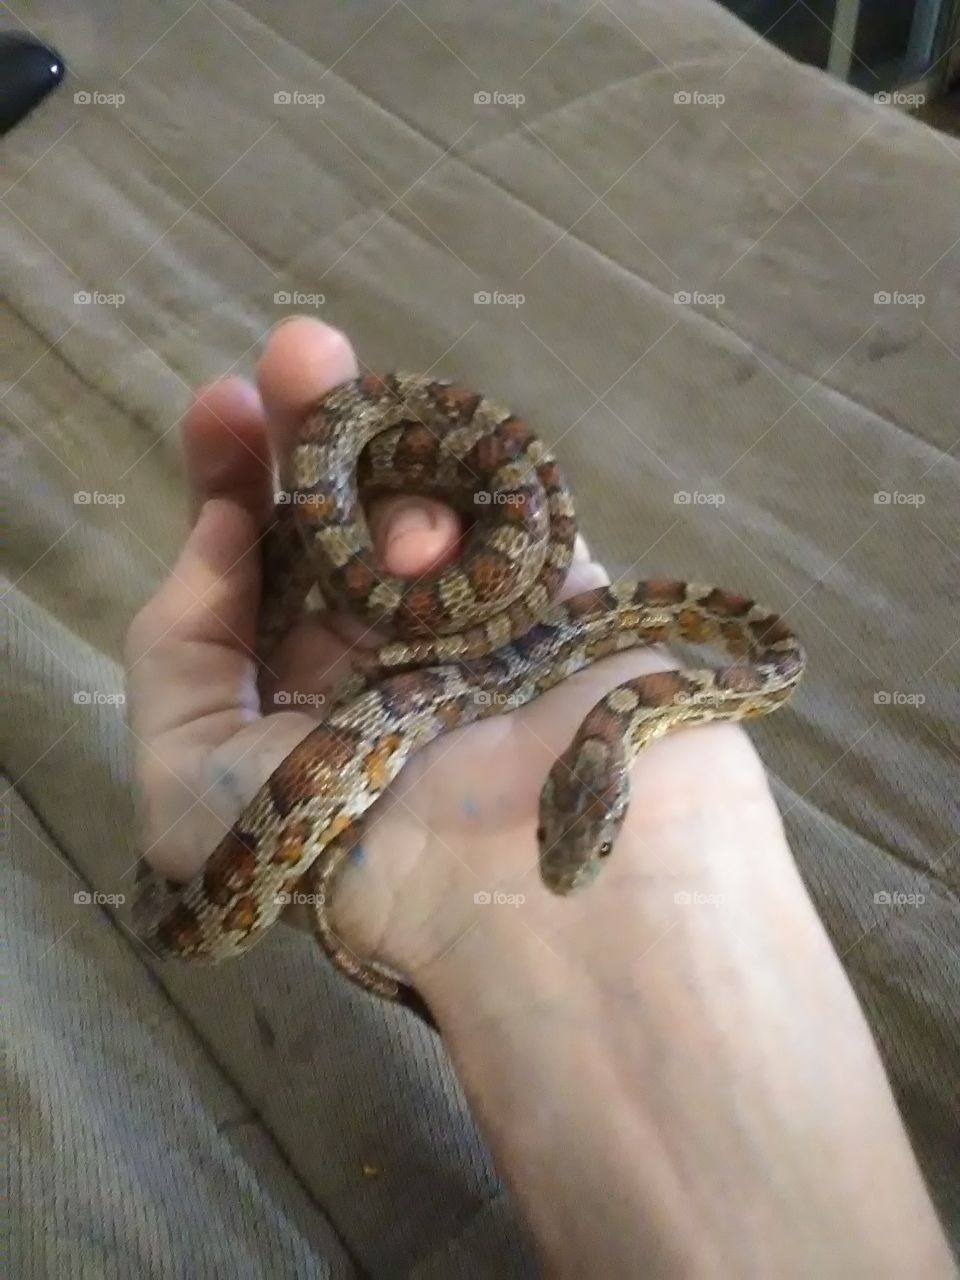 my snake just chilling on my hand. is my corn snake he's about a year old. he's very good with the kids for girl scouts and Cub scouts. I like taking him so they can learn about snakes and had to take care of them.